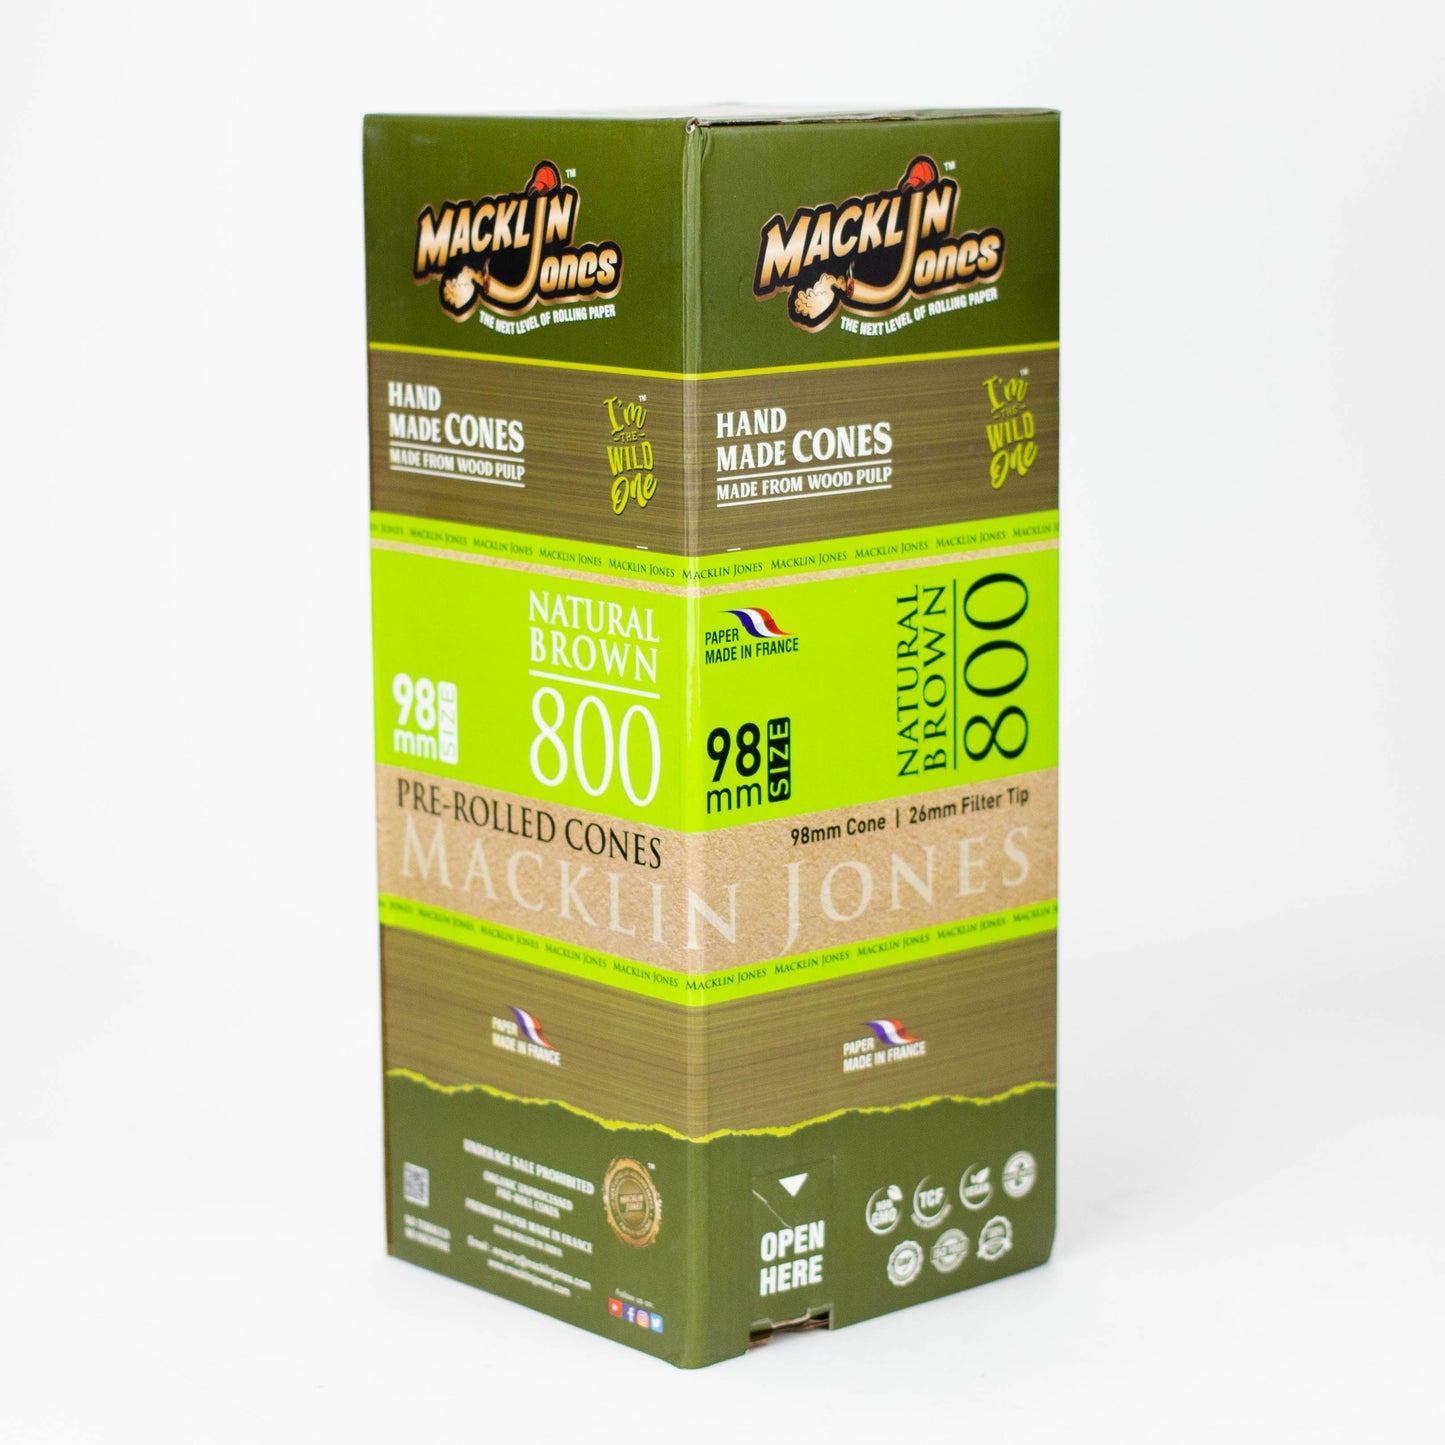 Macklin Jones - Natural Brown 98 mm Size Pre-Rolled cones Tower 800_0